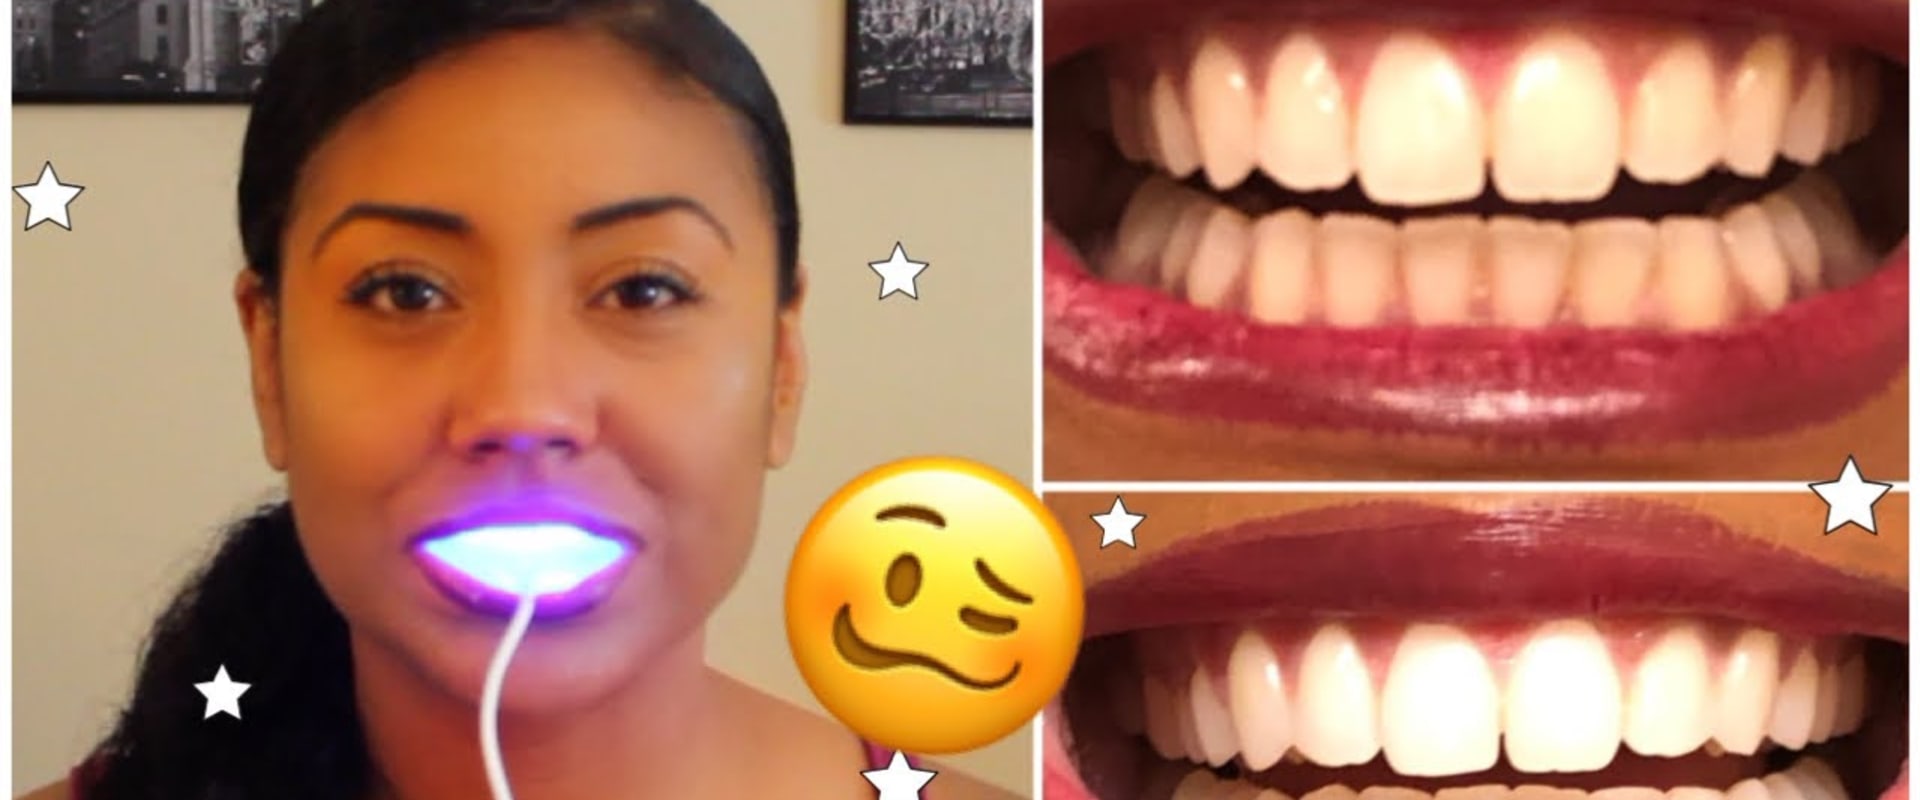 How to Get the Best Results from At-Home Teeth Whitening Kits